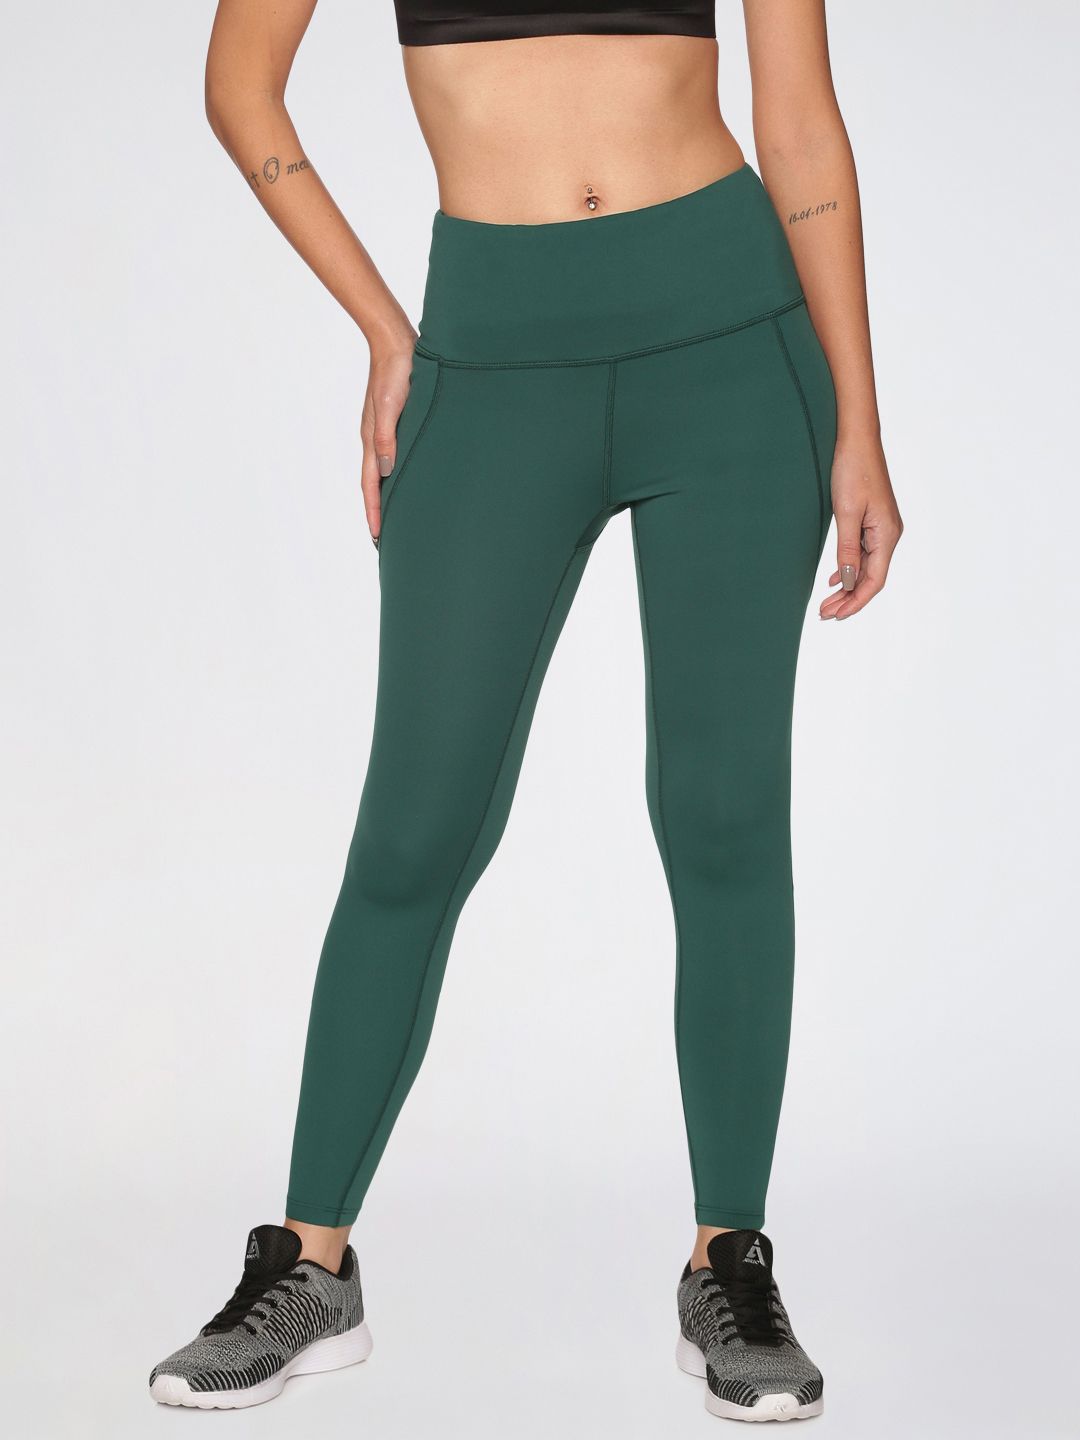 BlissClub Women Green Super Stretchy & High Waisted The Ultimate Leggings Price in India